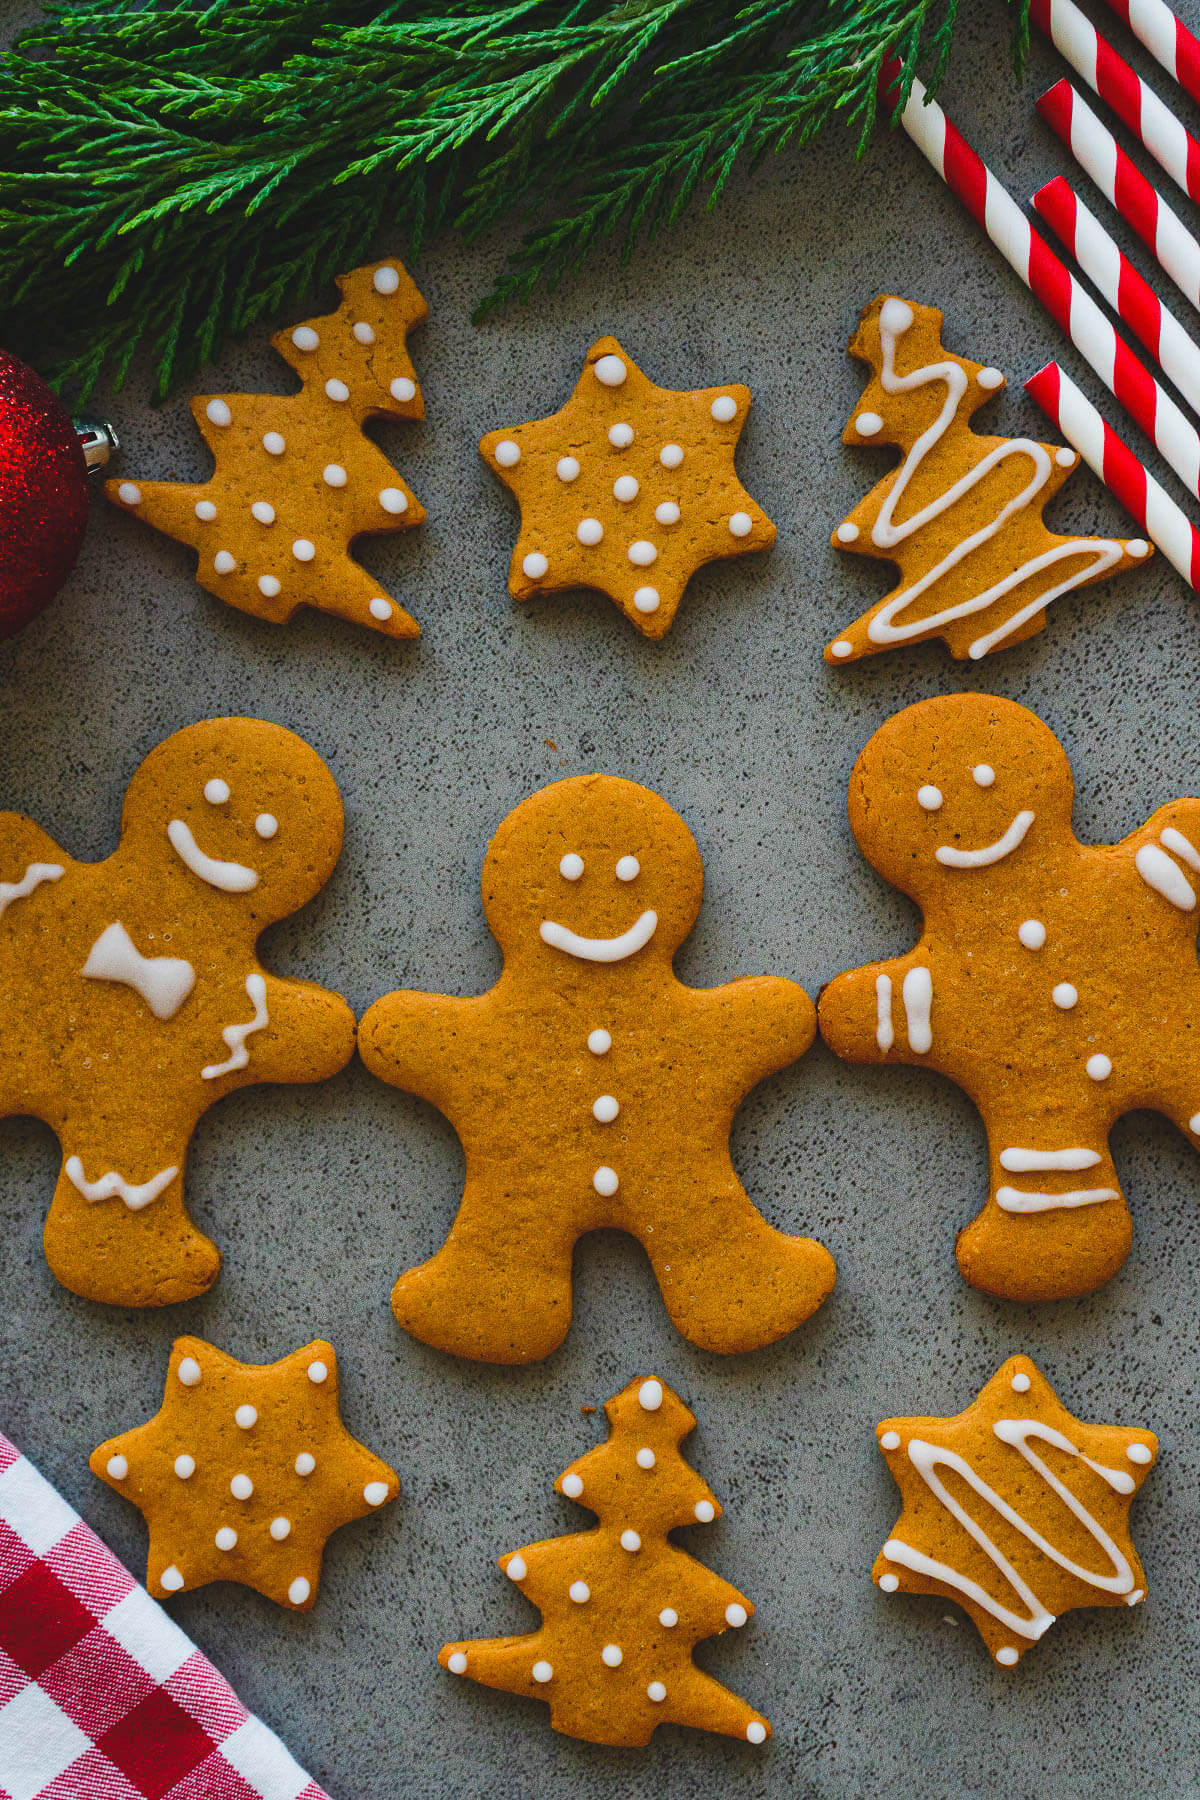 Golden baked easy gingerbread cookies decorated with simple white piped icing embellishments.